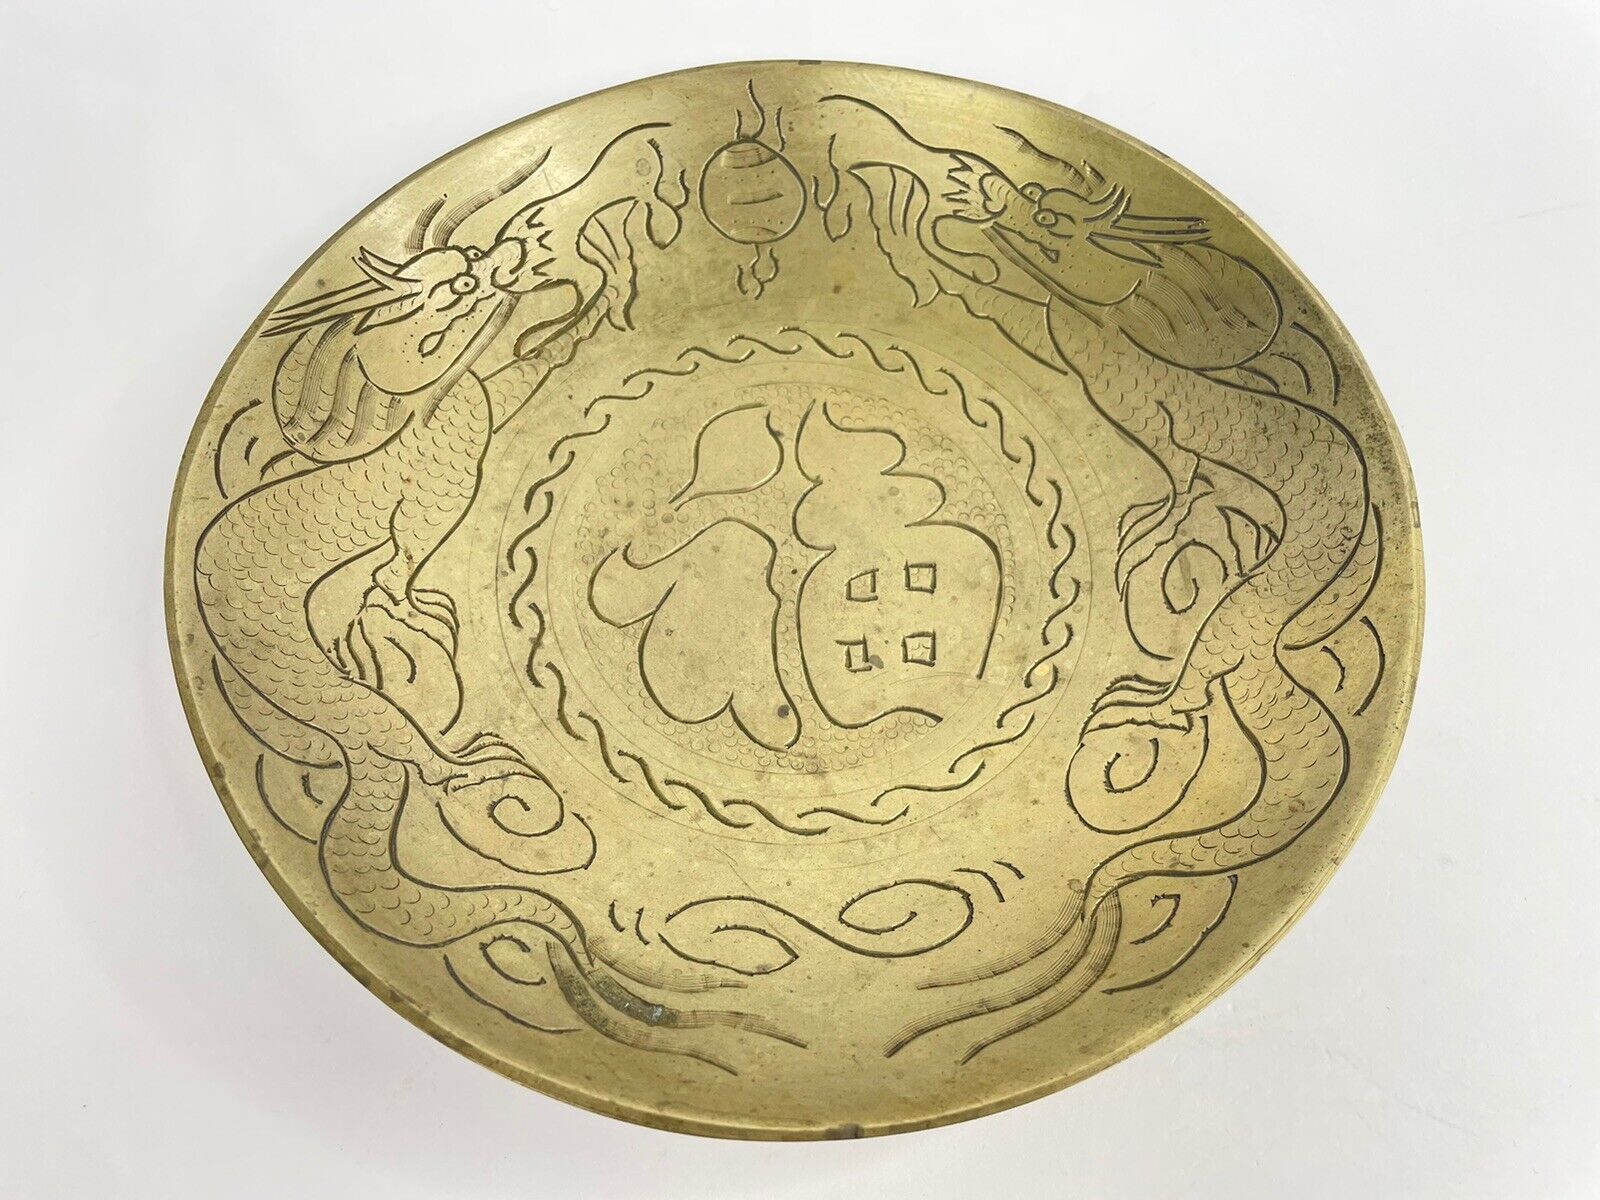 Antique - Chinese Brass Bowl - 2 Dragons - Engraved Design - 9 Inches Diameter